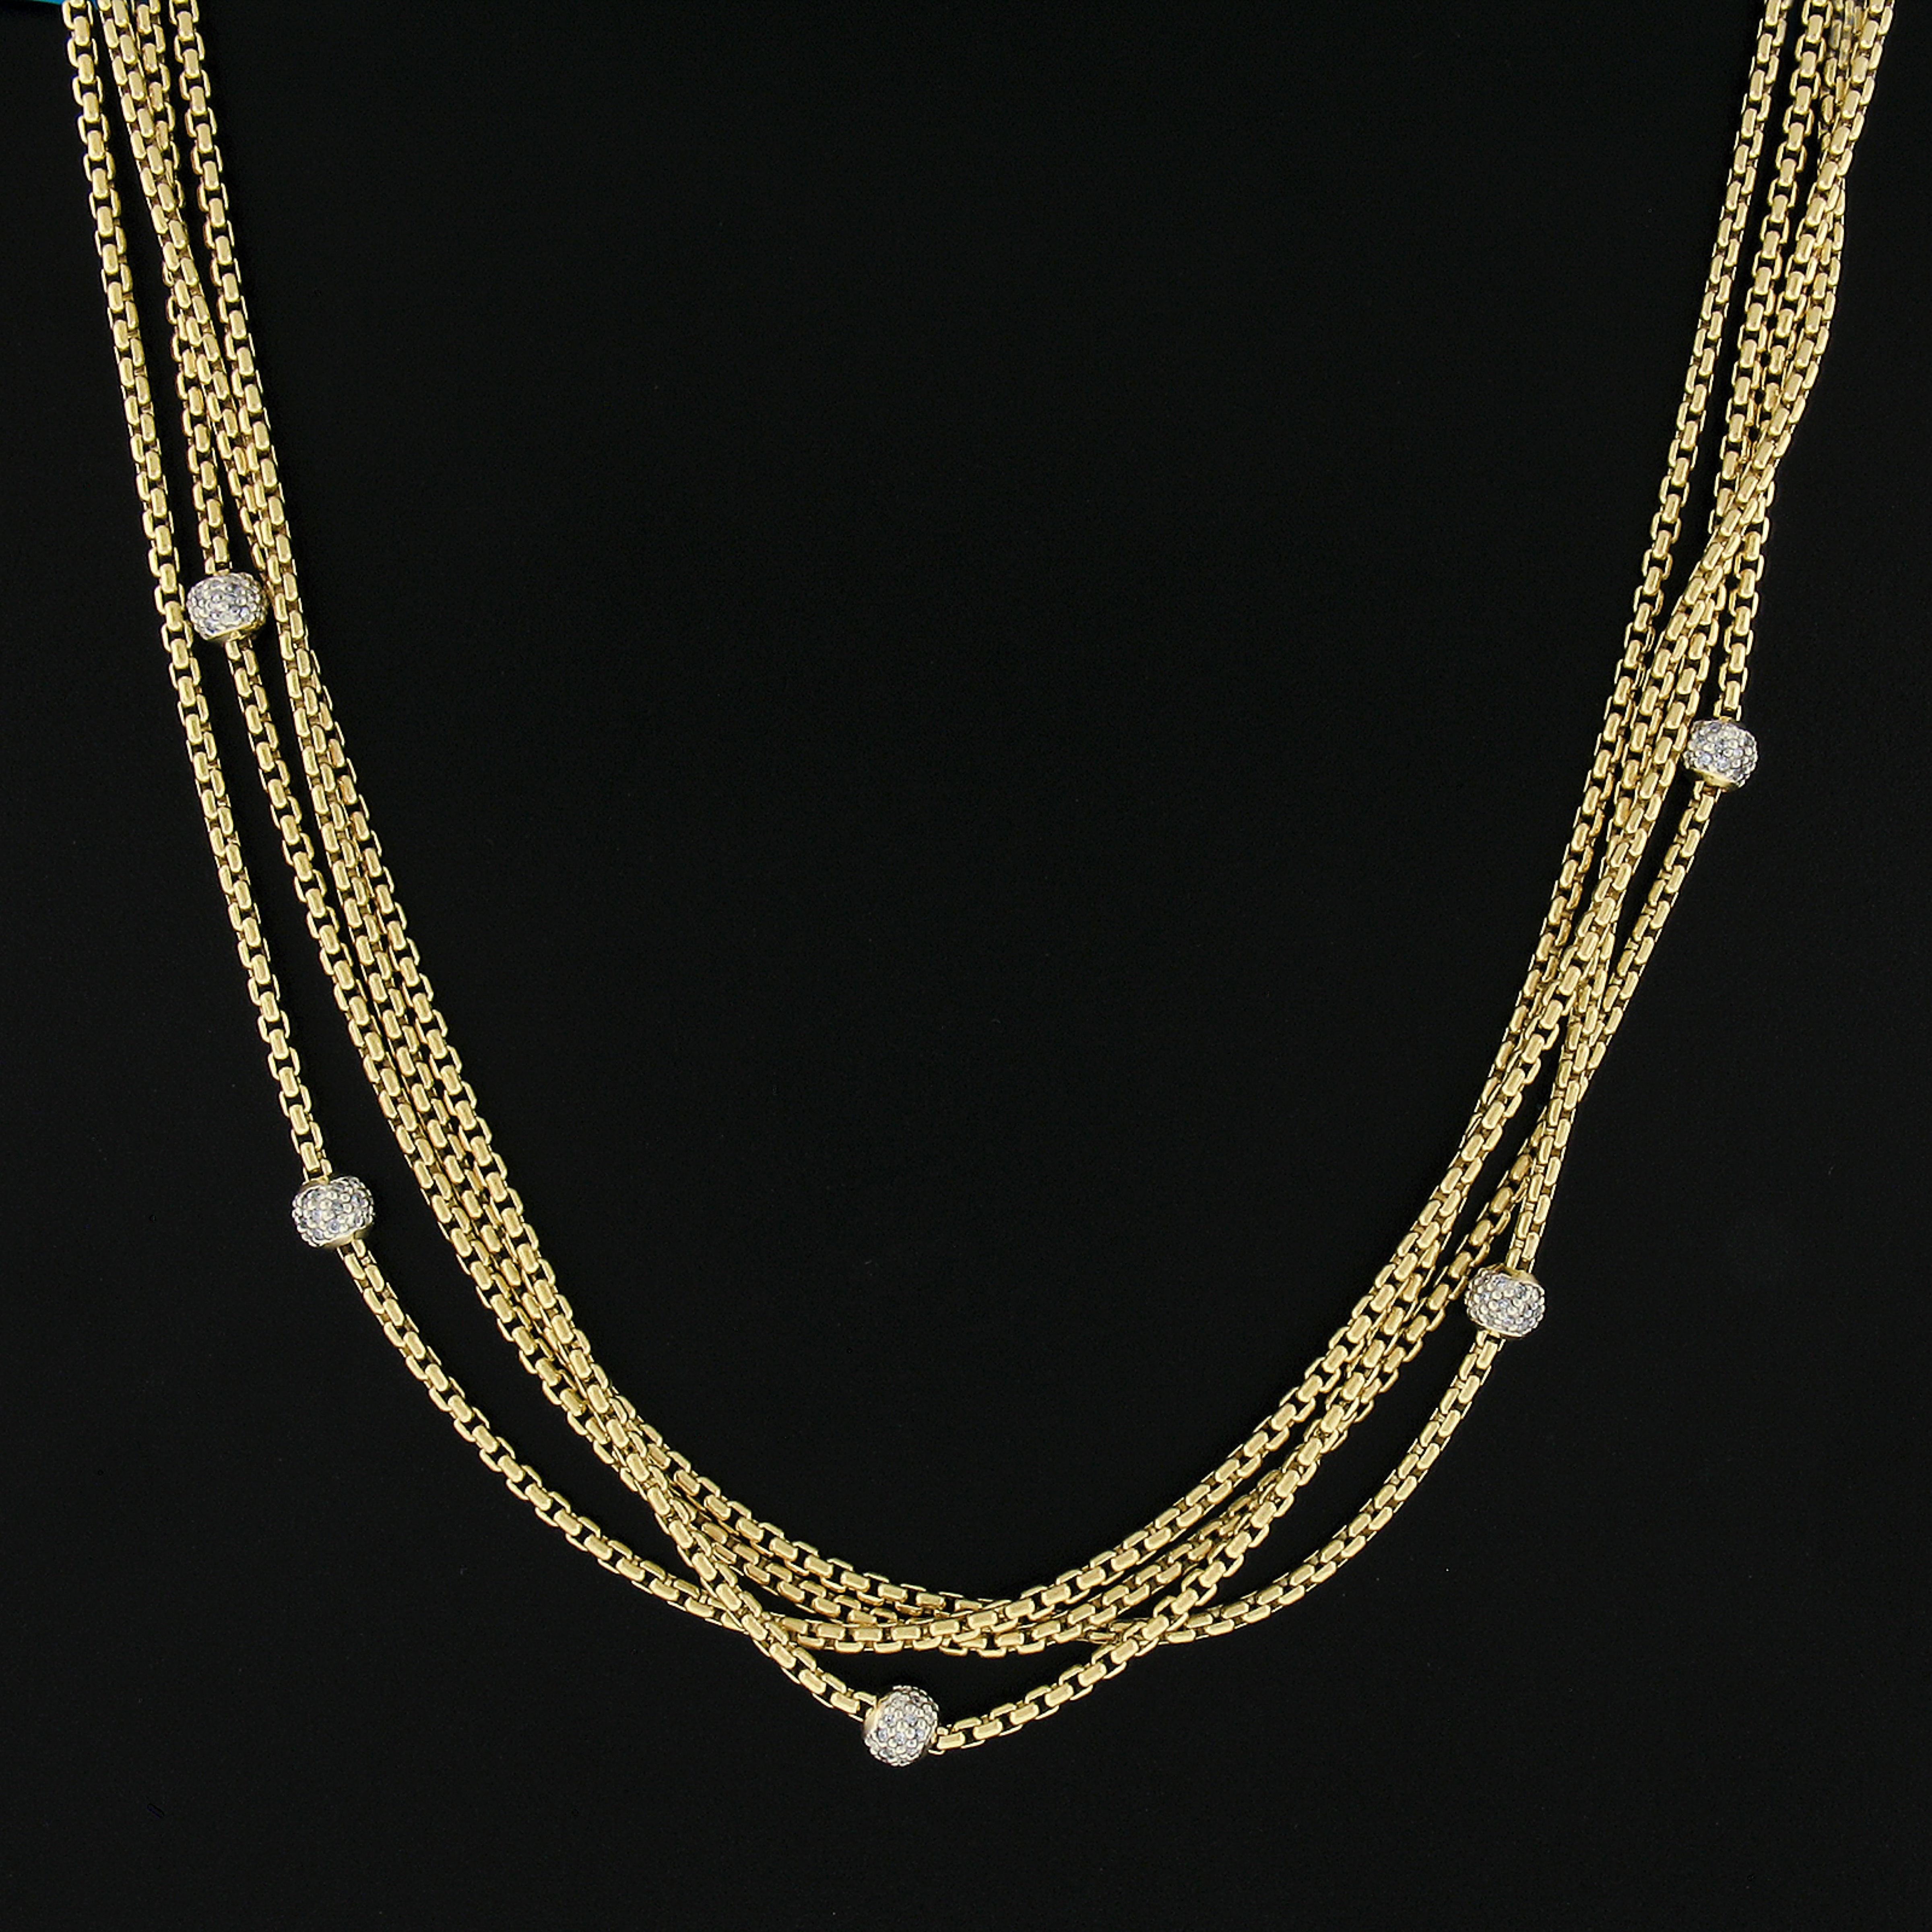 4 chain necklace